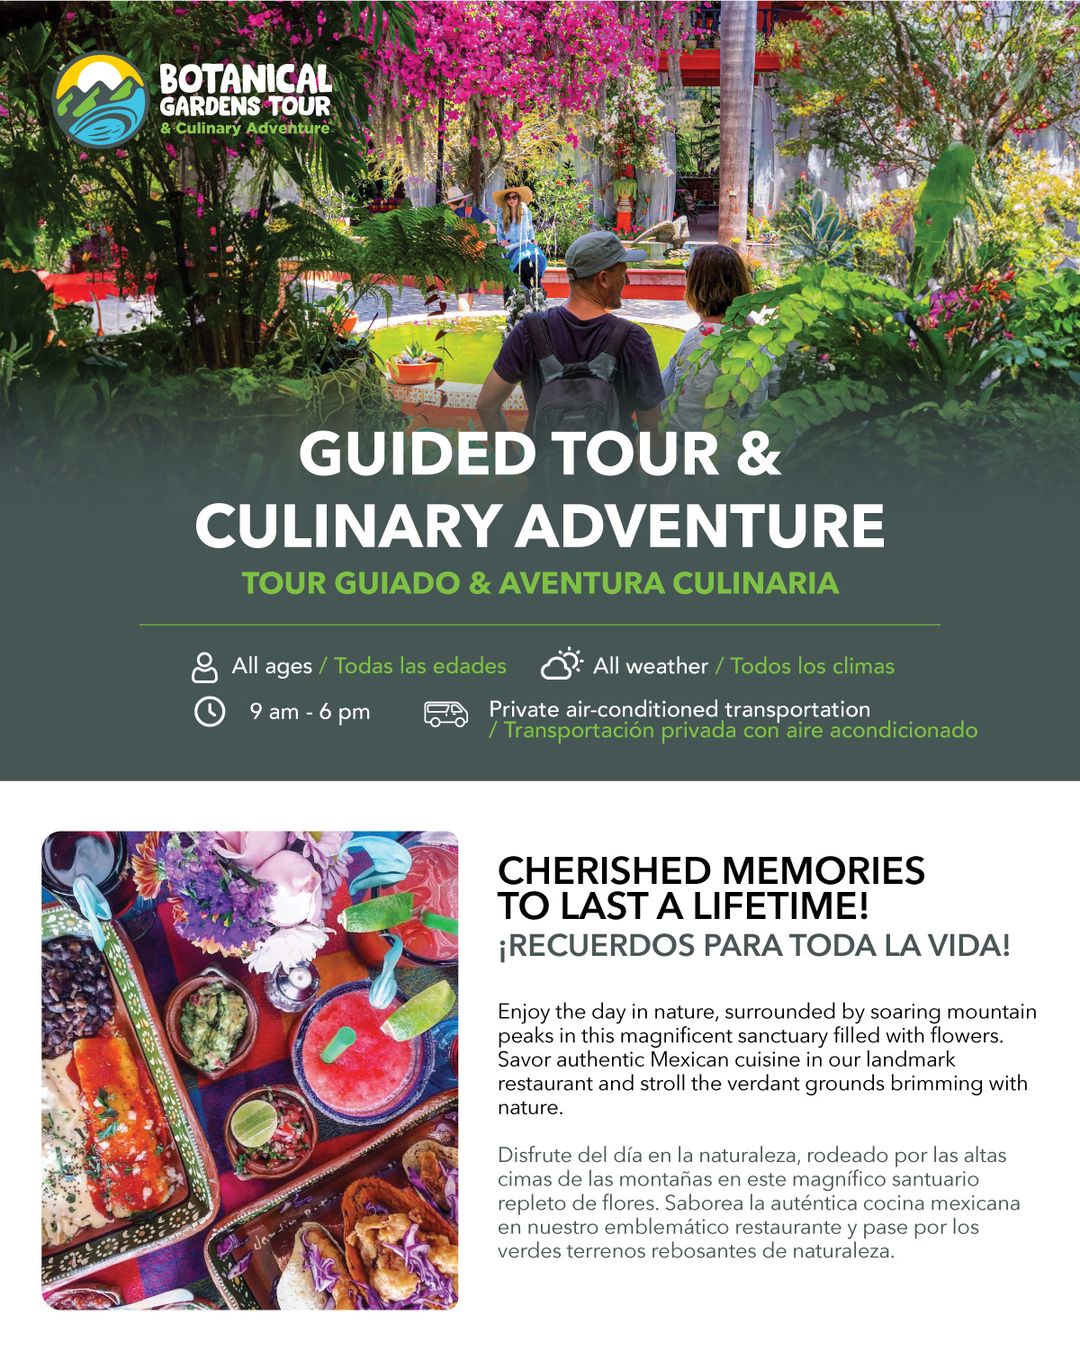 Guided Tour & Culinary Adventure